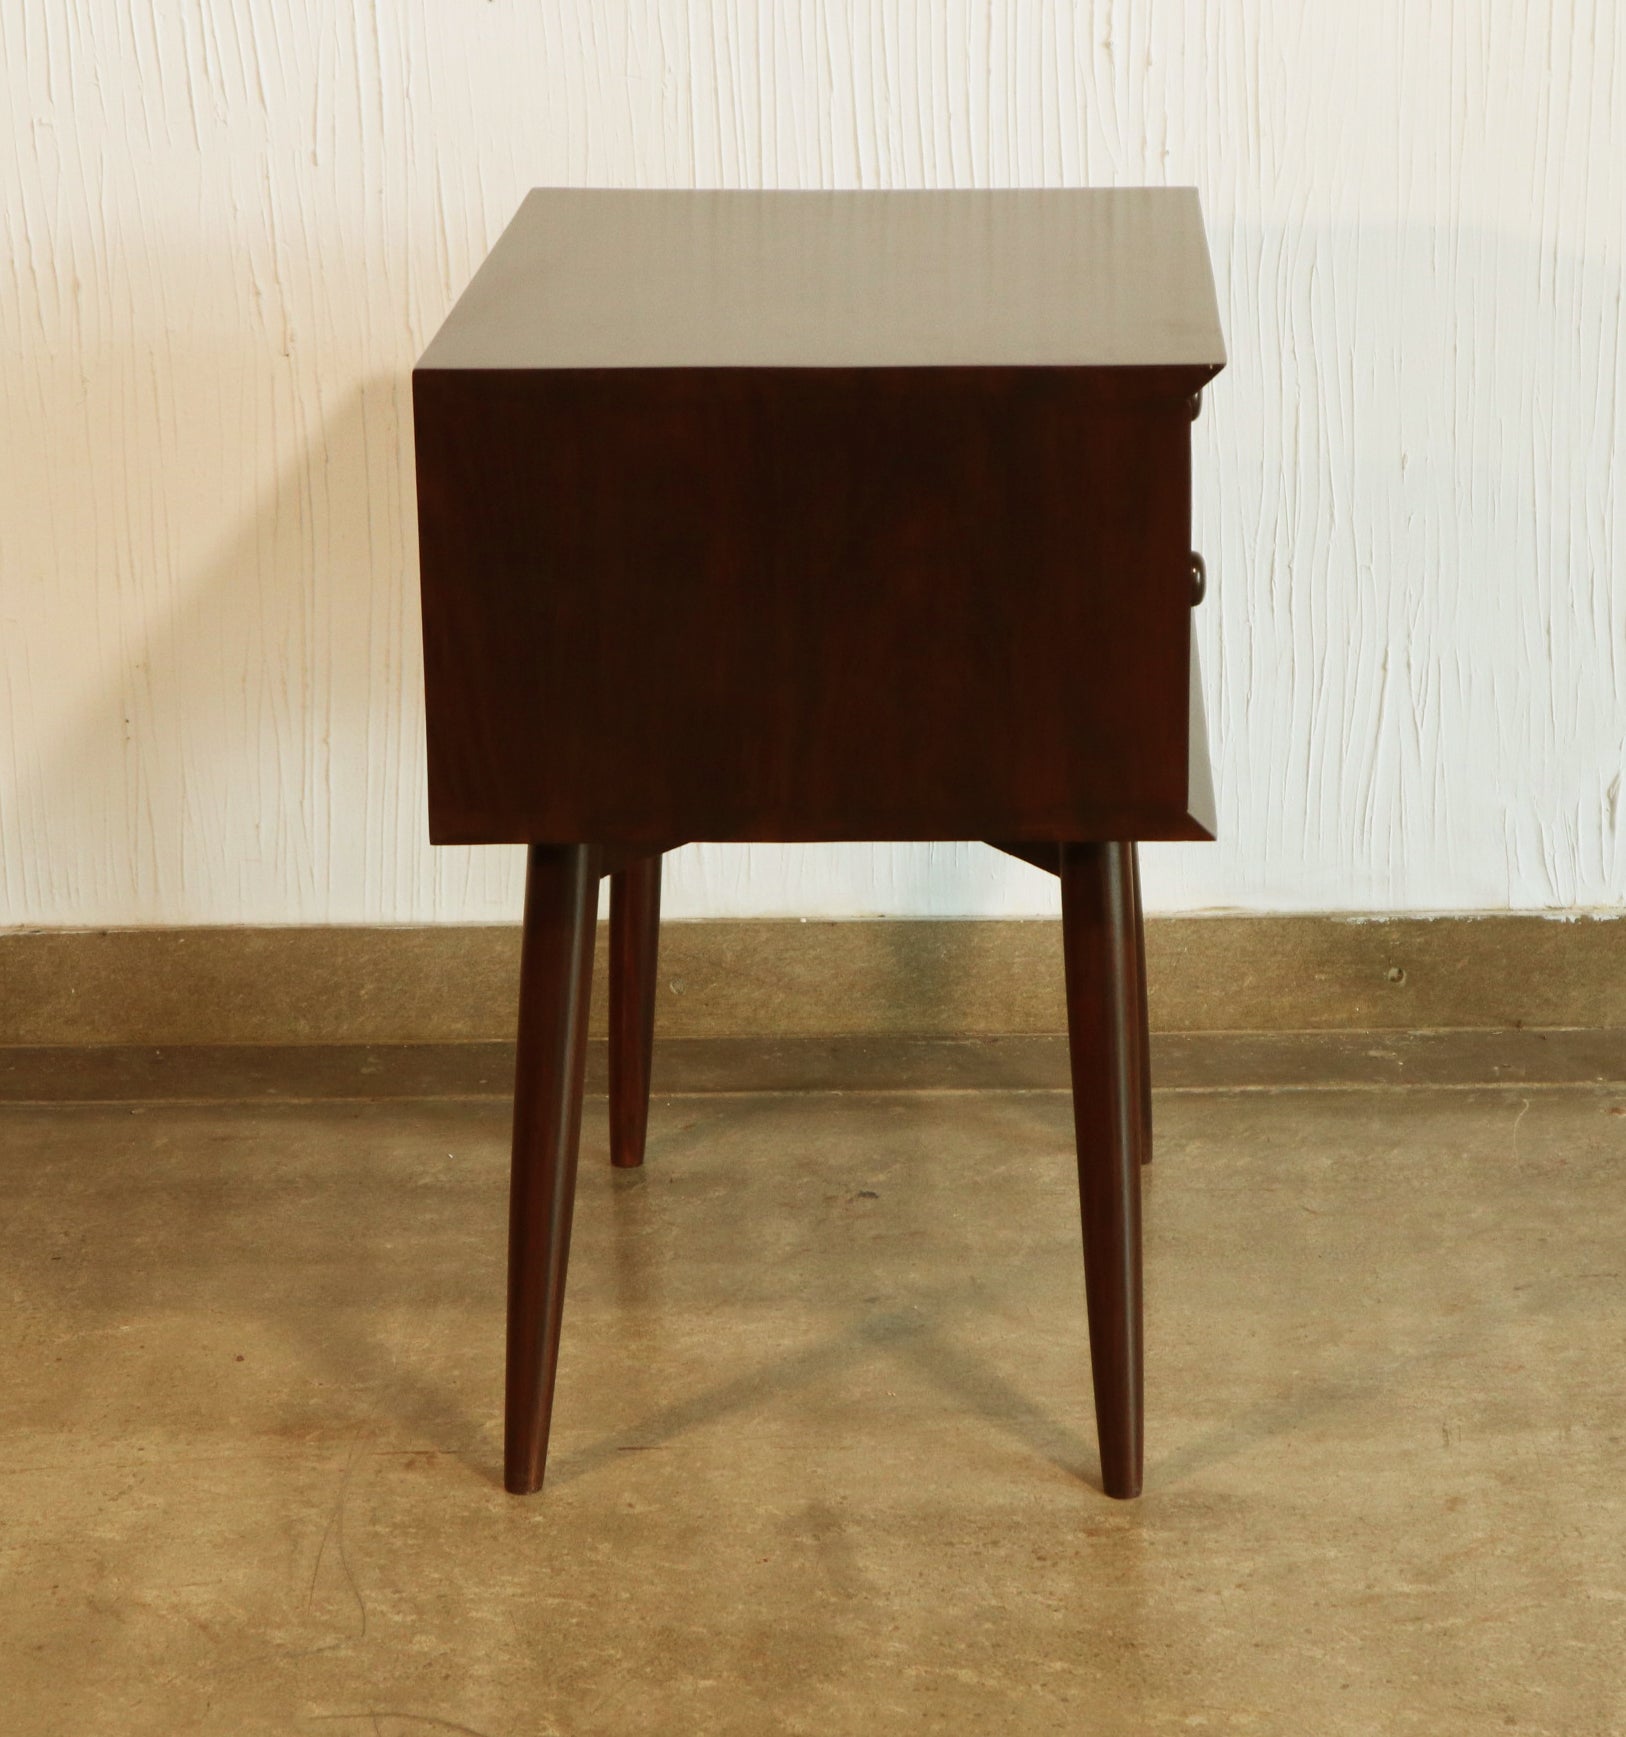 Carter Mid Century bedside table